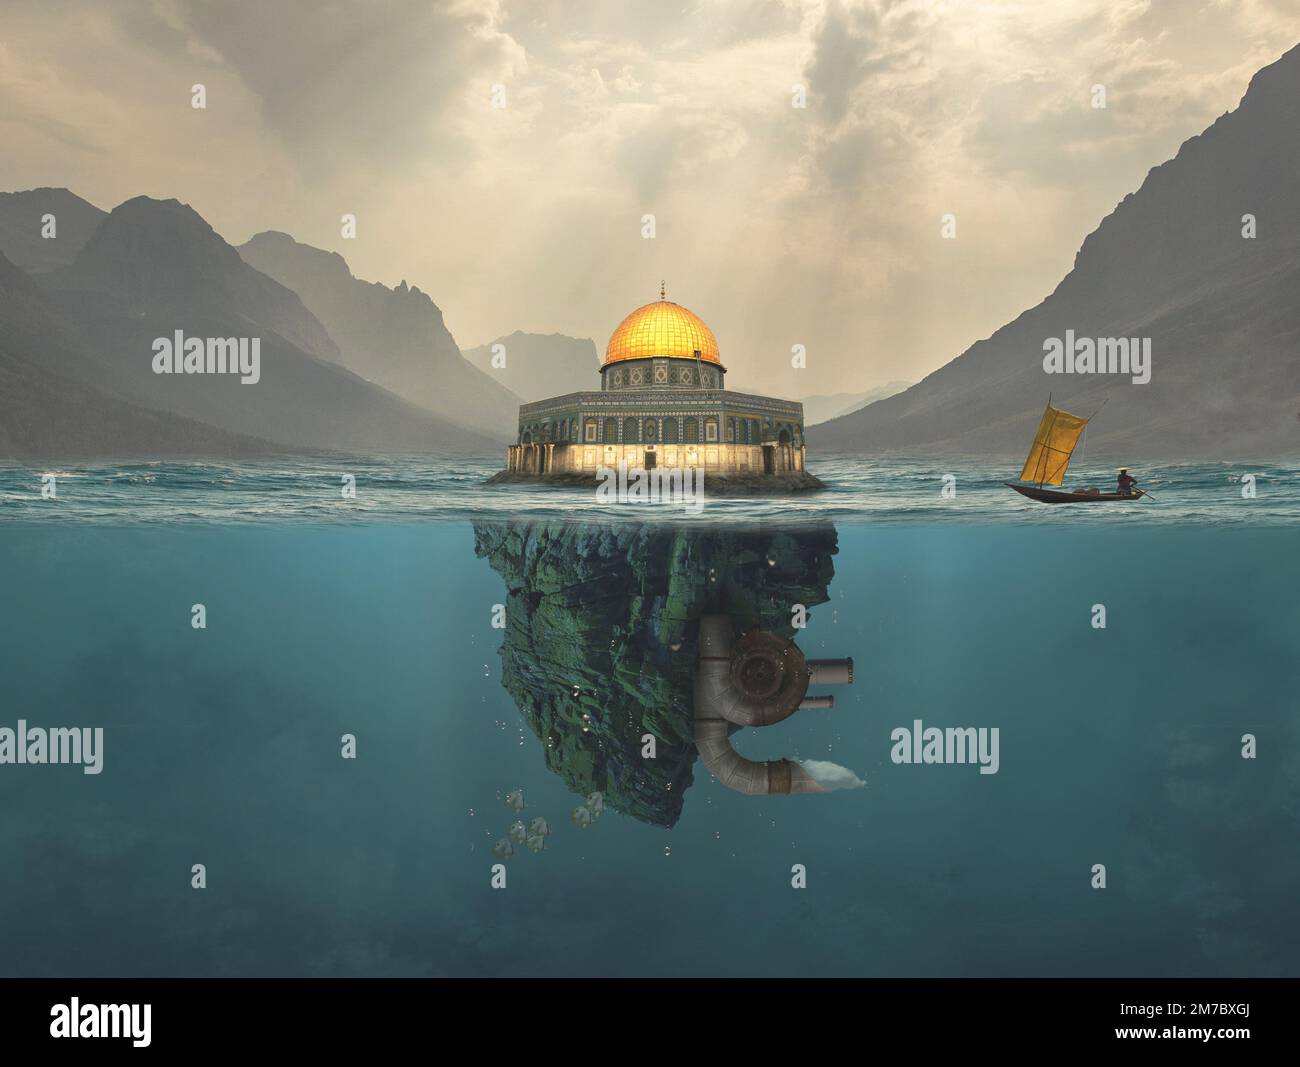 A long exposure of Al-Aqsa (Dome of the Rock) on Sea Stock Photo